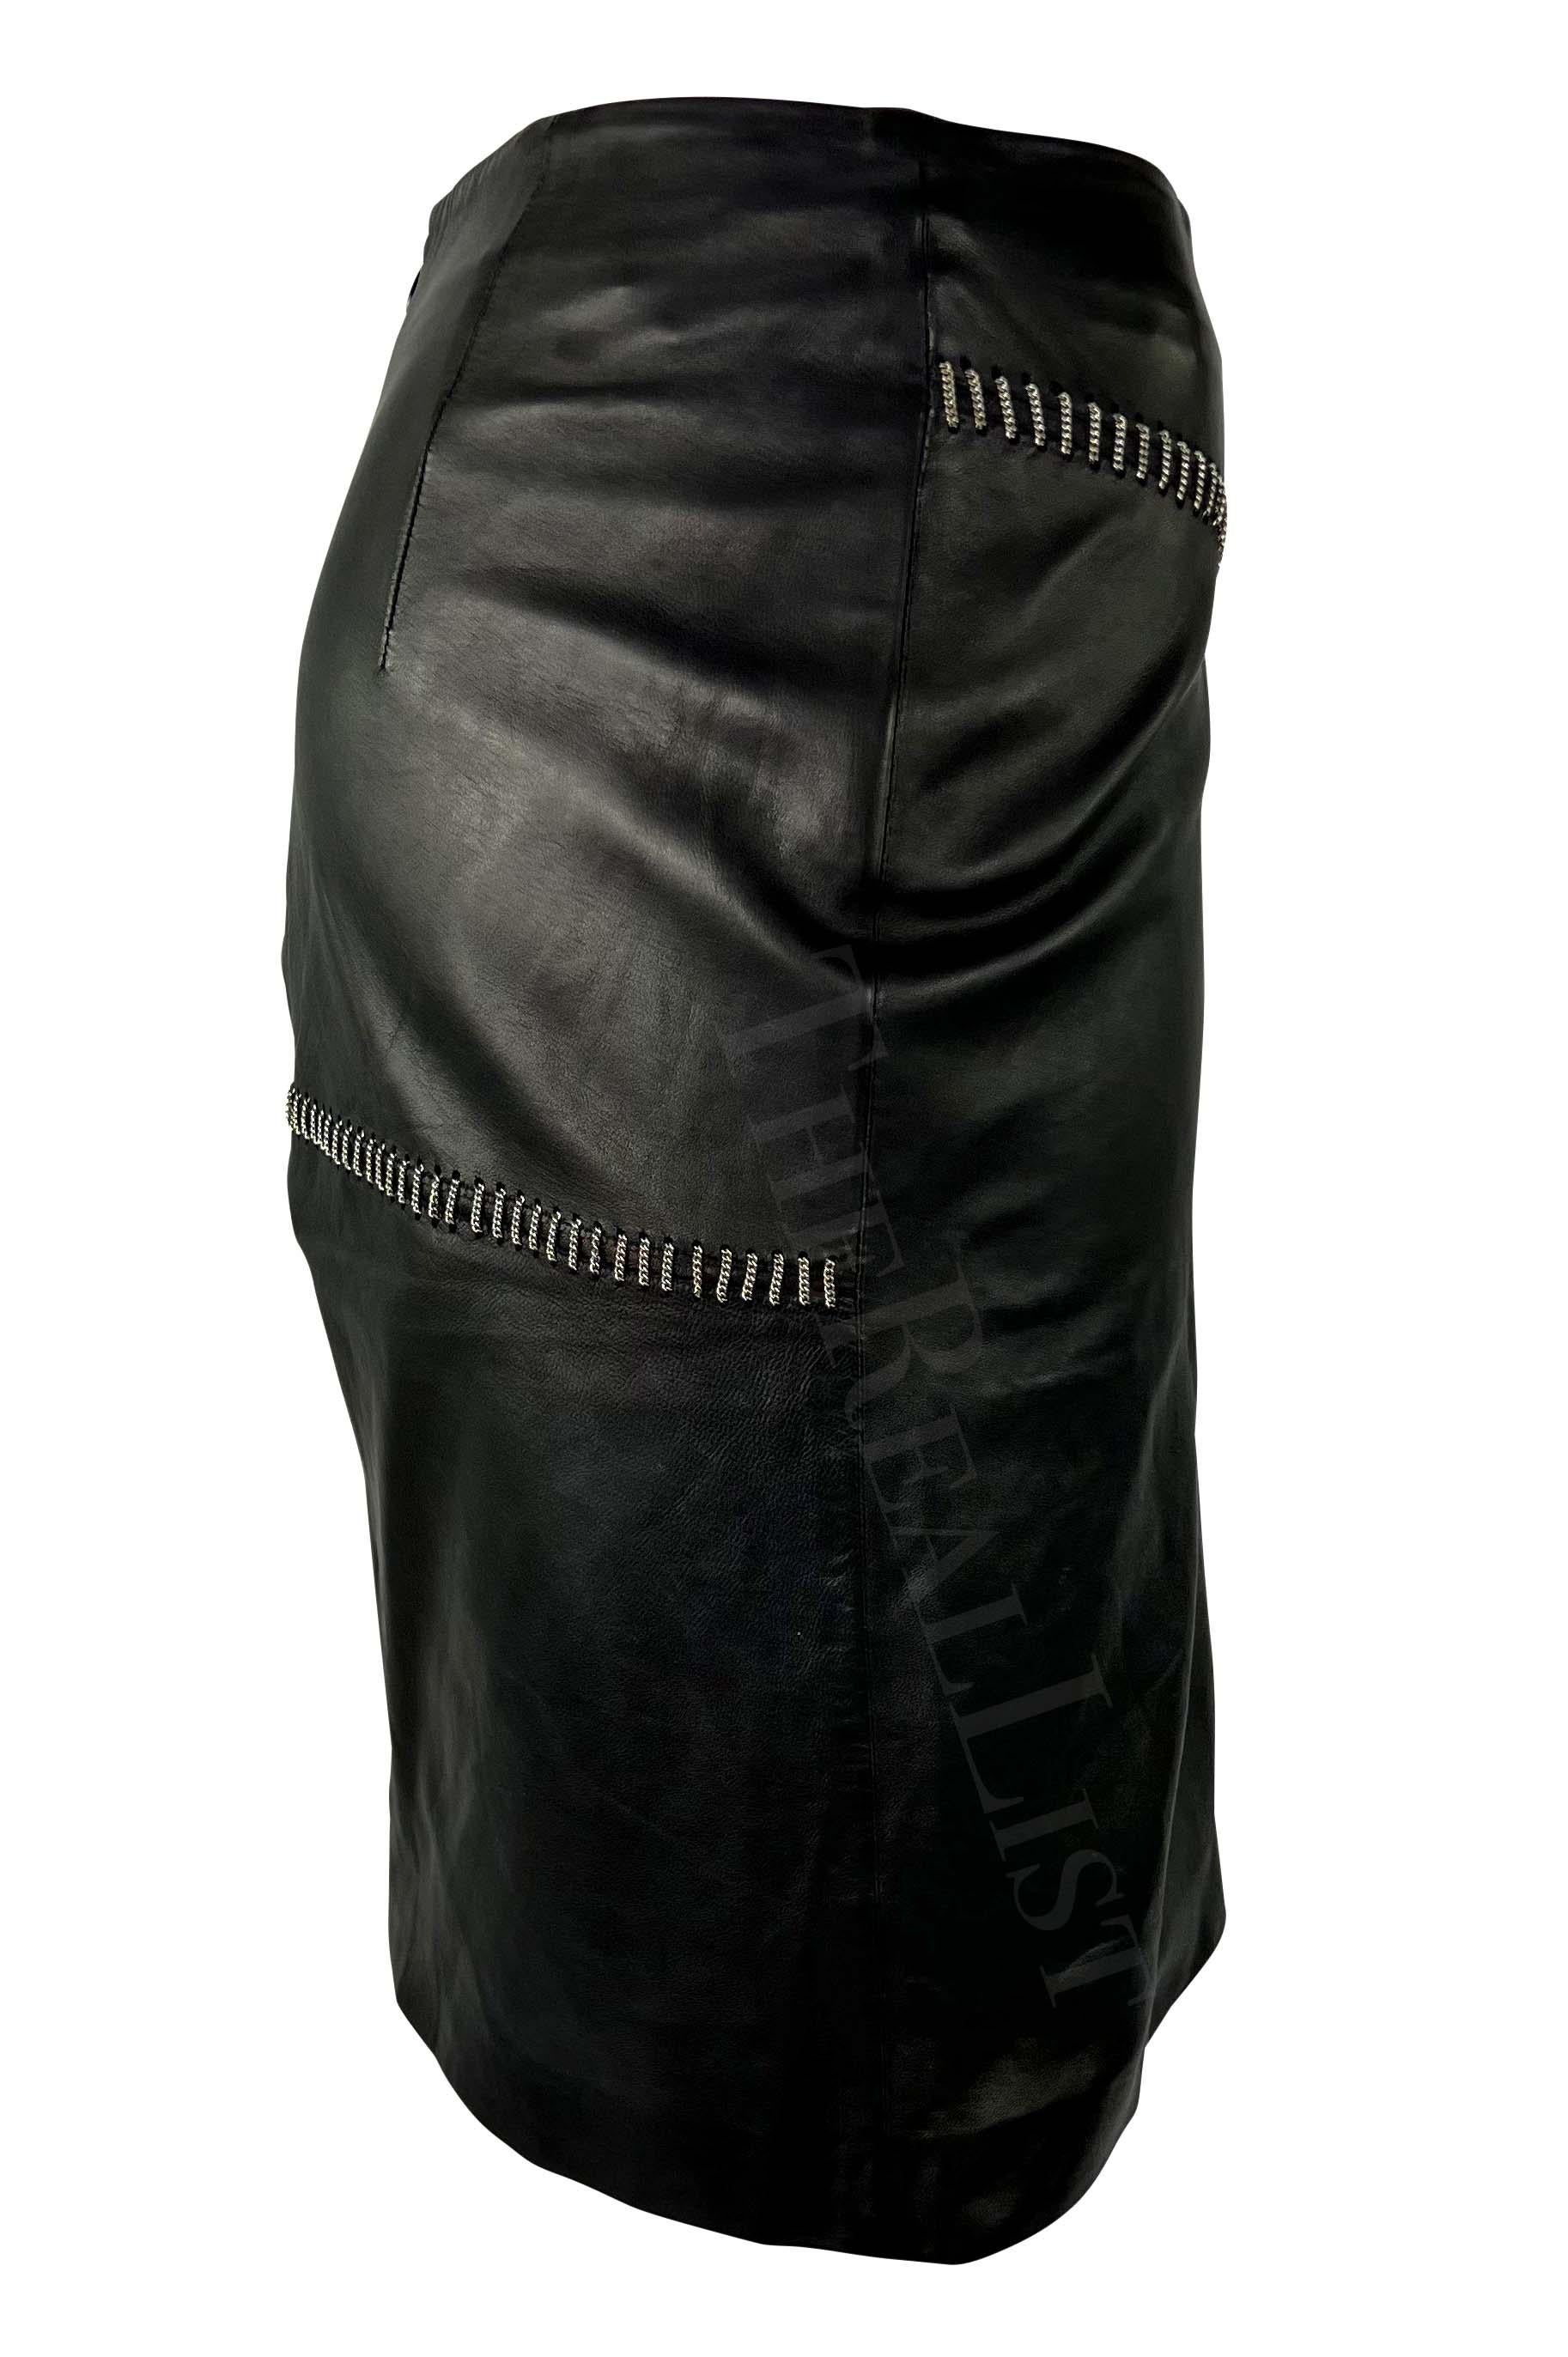 S/S 1999 Gianni Versace by Donatella Black Leather Silver Chain Mini Skirt For Sale 2